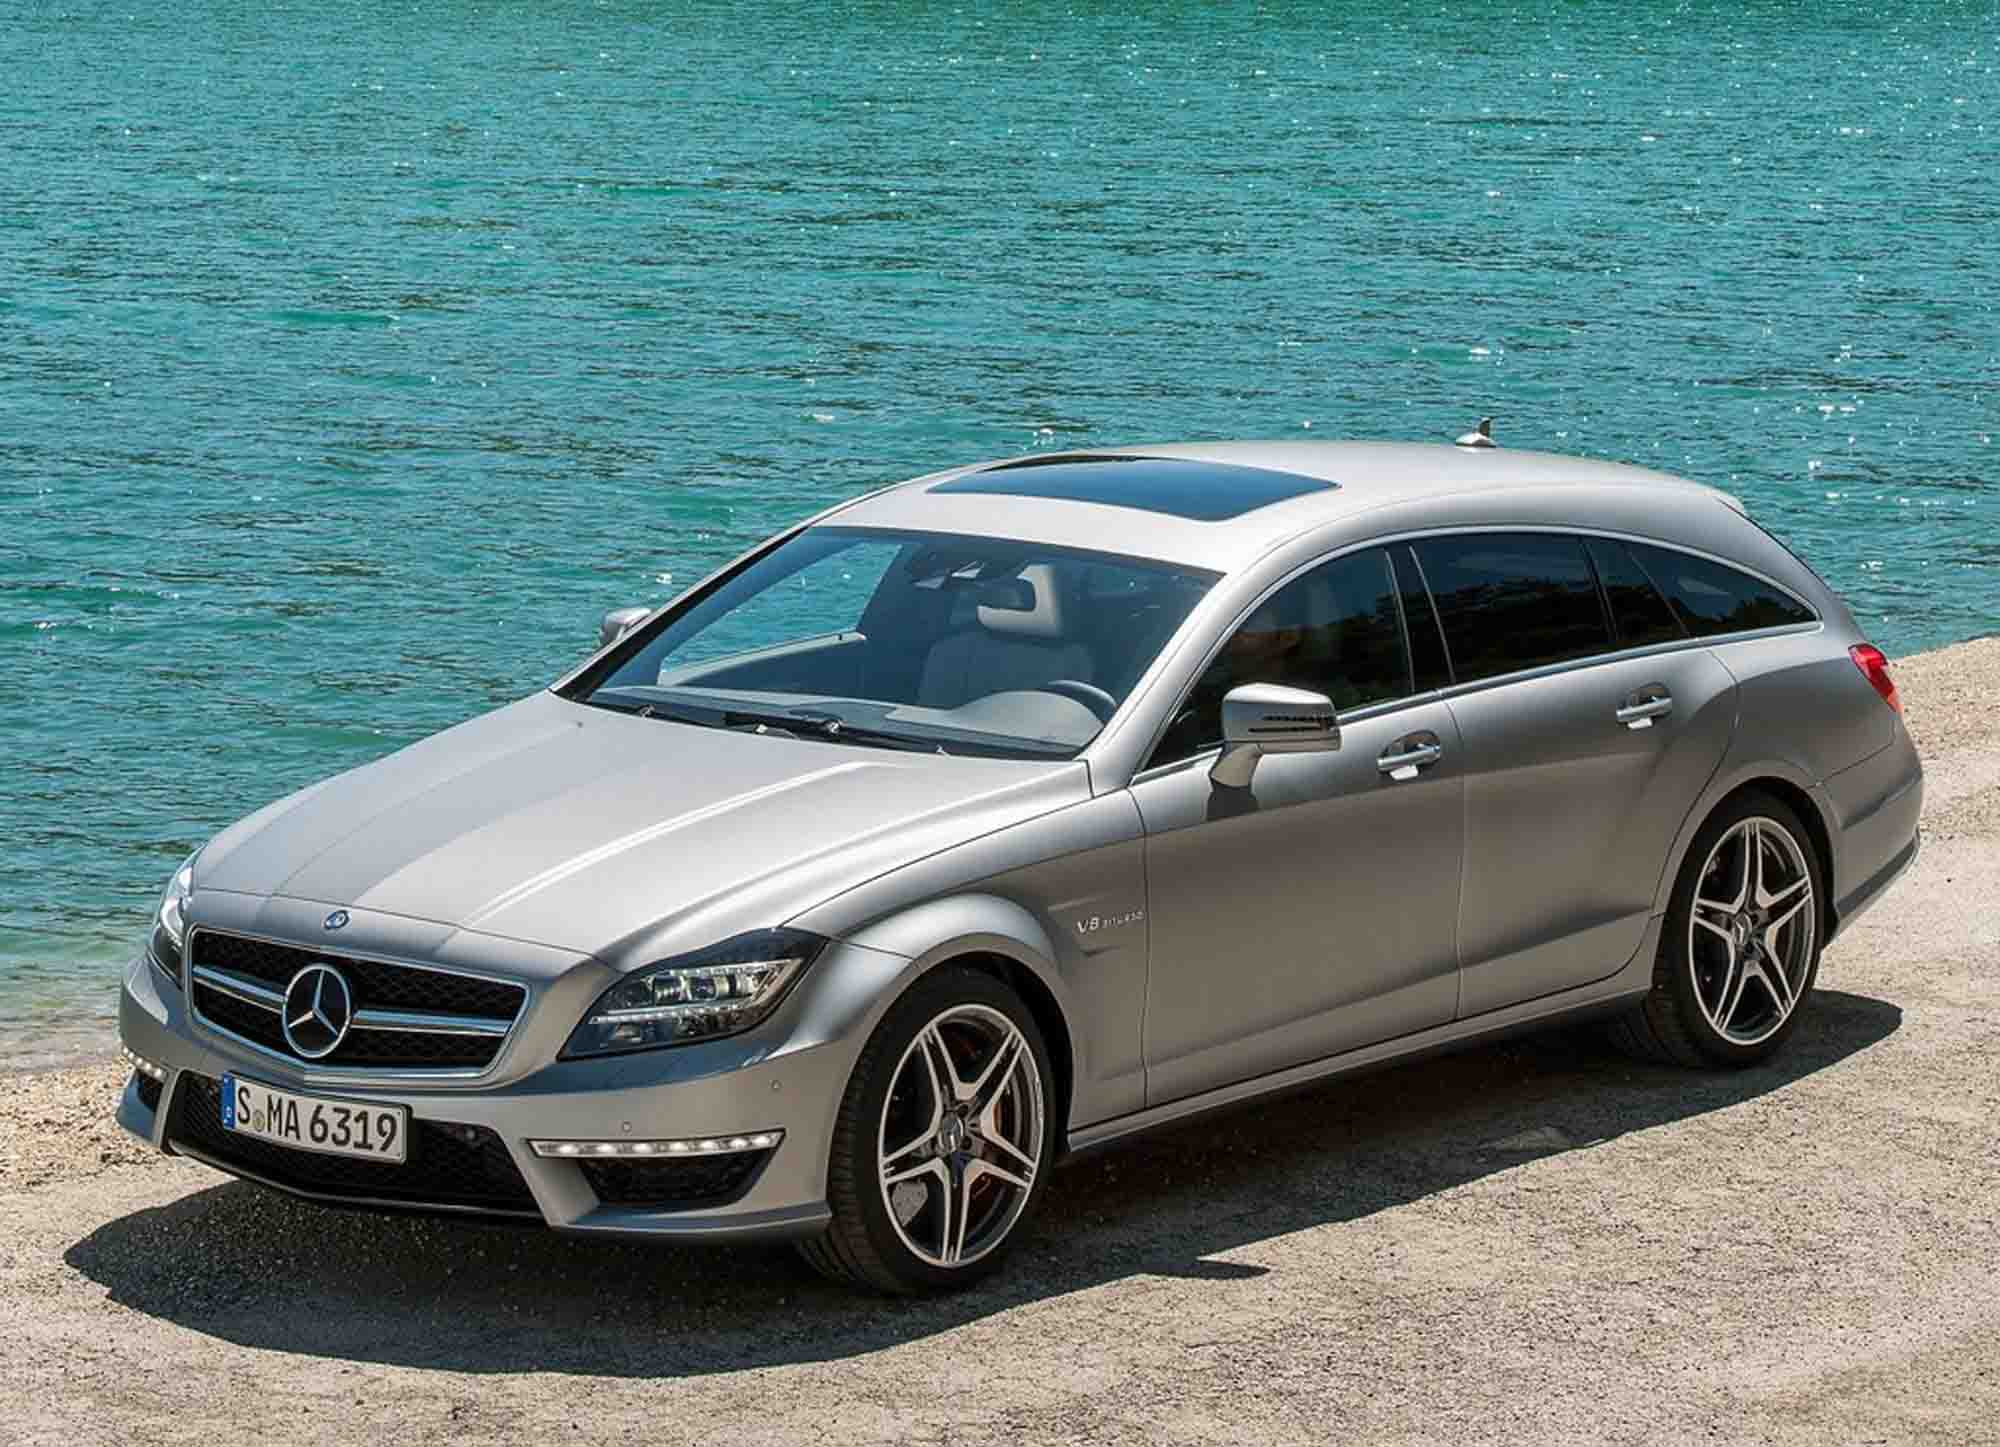 Mercedes Benz CLS| CLS|2013 CLS Class Review| CLS Price